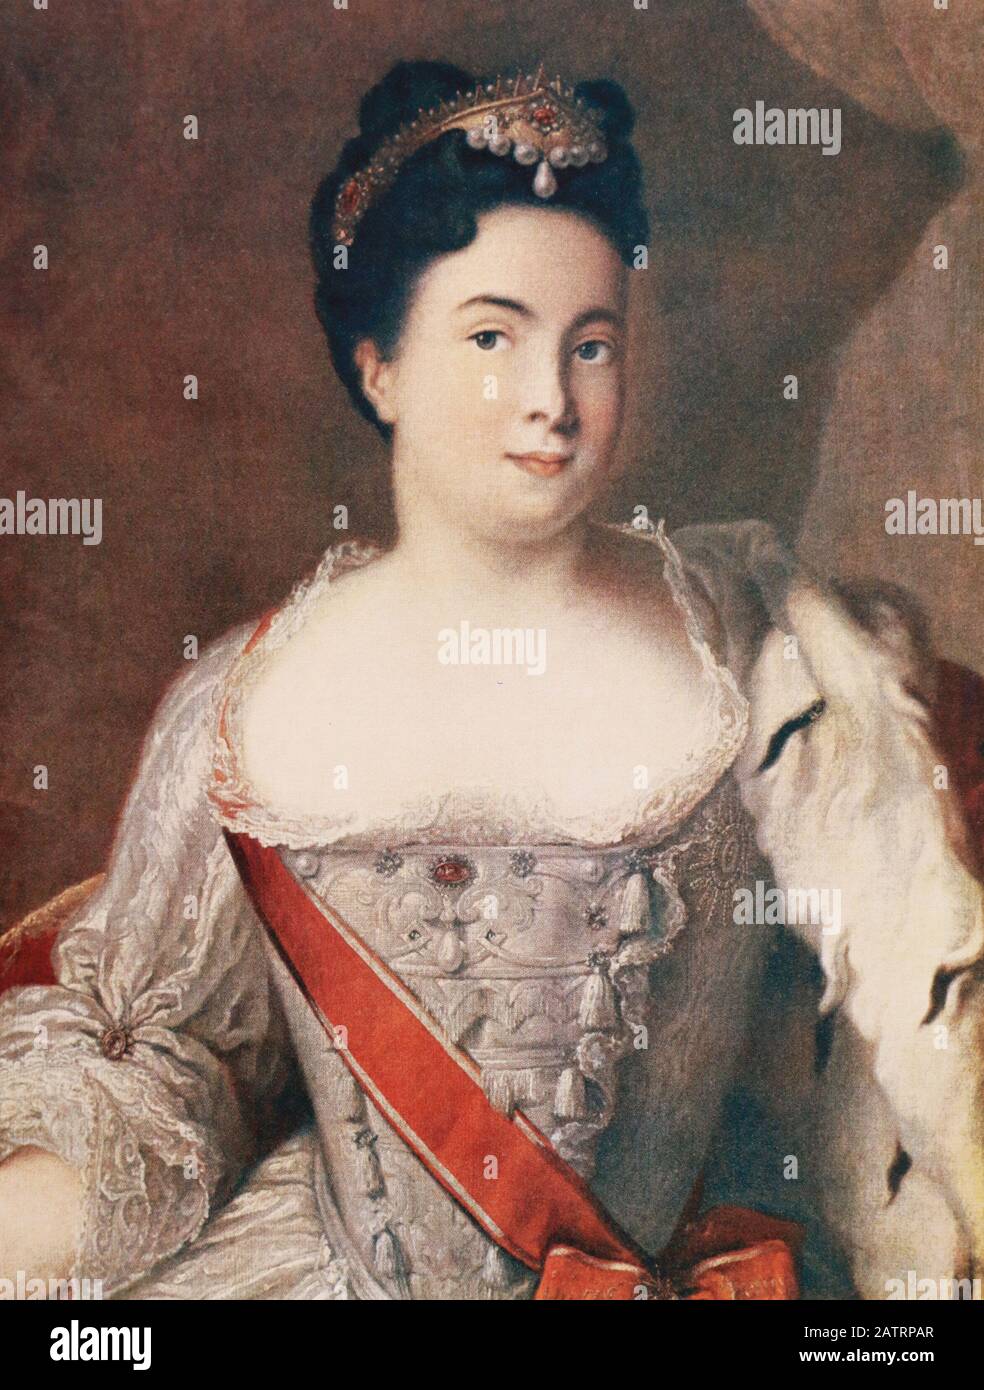 Russian Empress Catherine I Alekseevna. Painting of the 18th century. Stock Photo